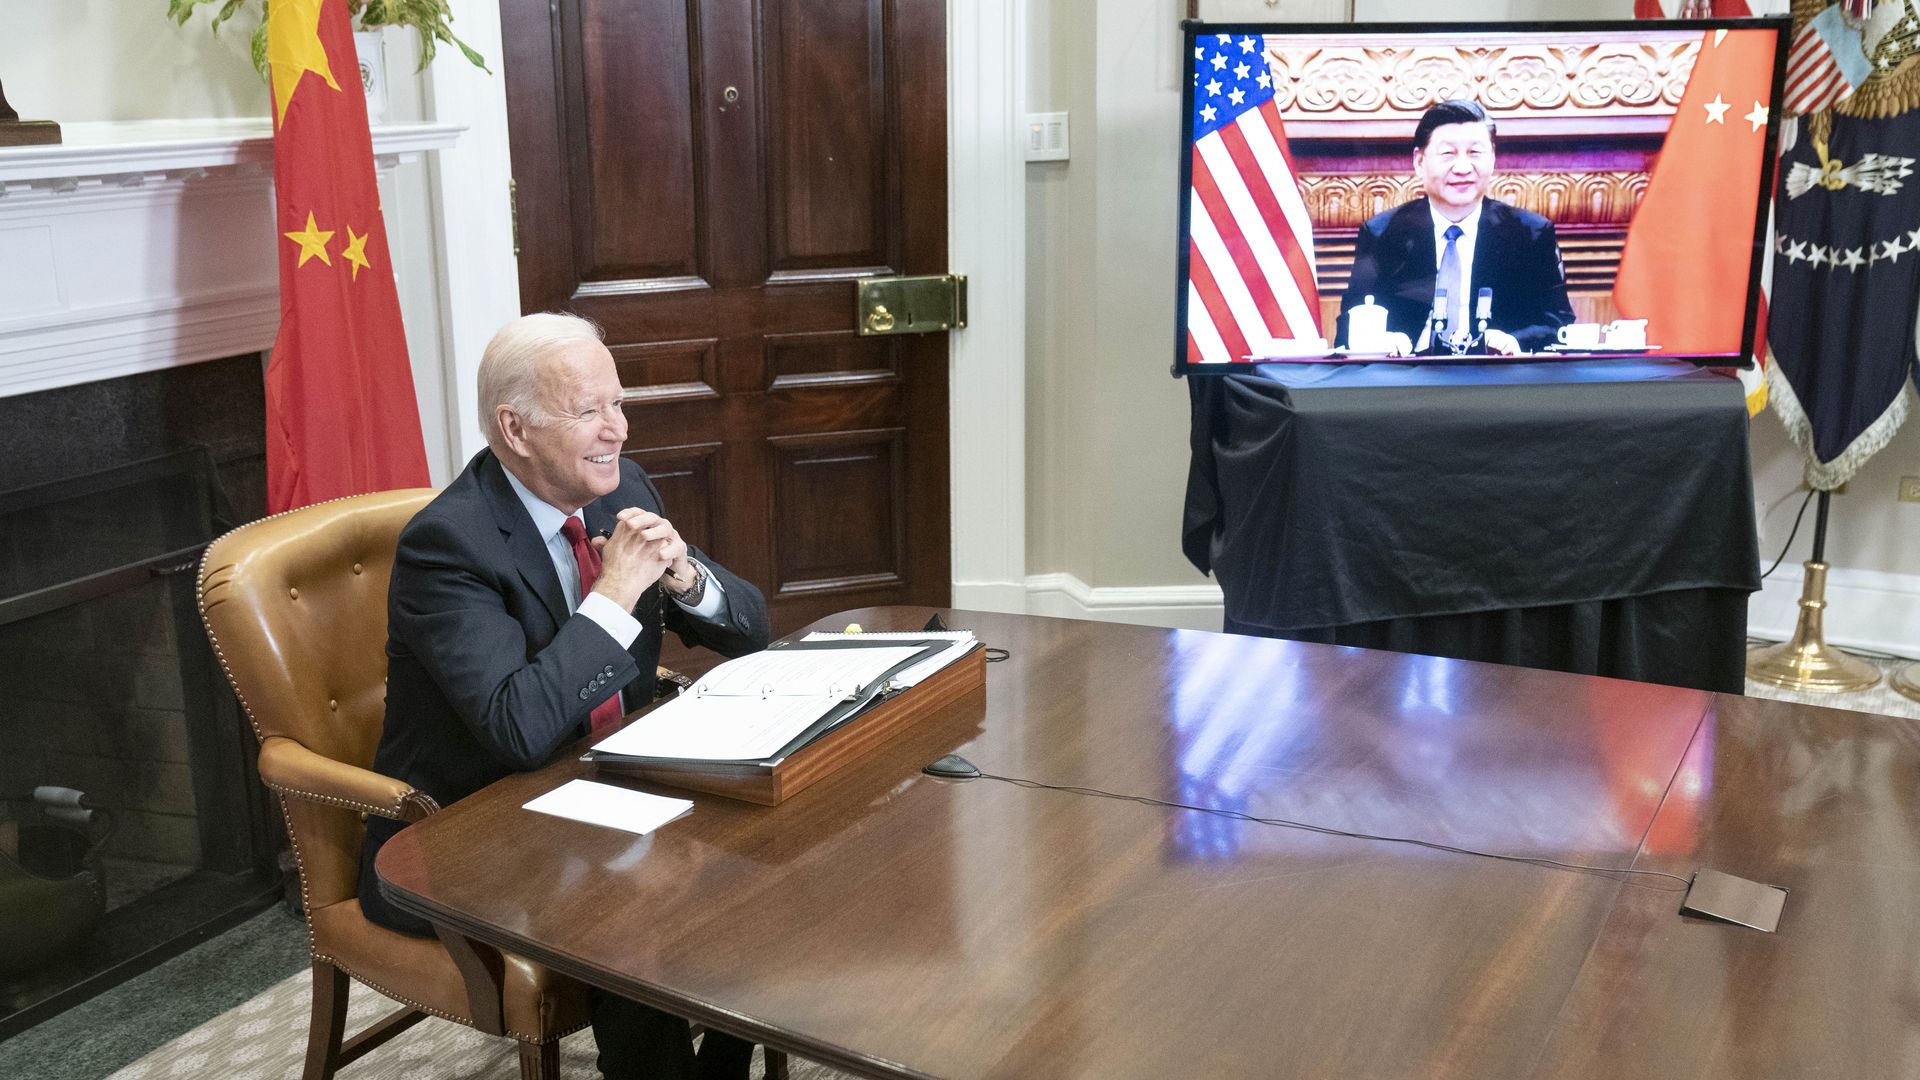 U.S. President Joe Biden reacts while meeting virtually with Xi Jinping, China's president, in the Roosevelt Room of the White House in Washington, D.C., U.S., on Monday, Nov. 15, 2021. 